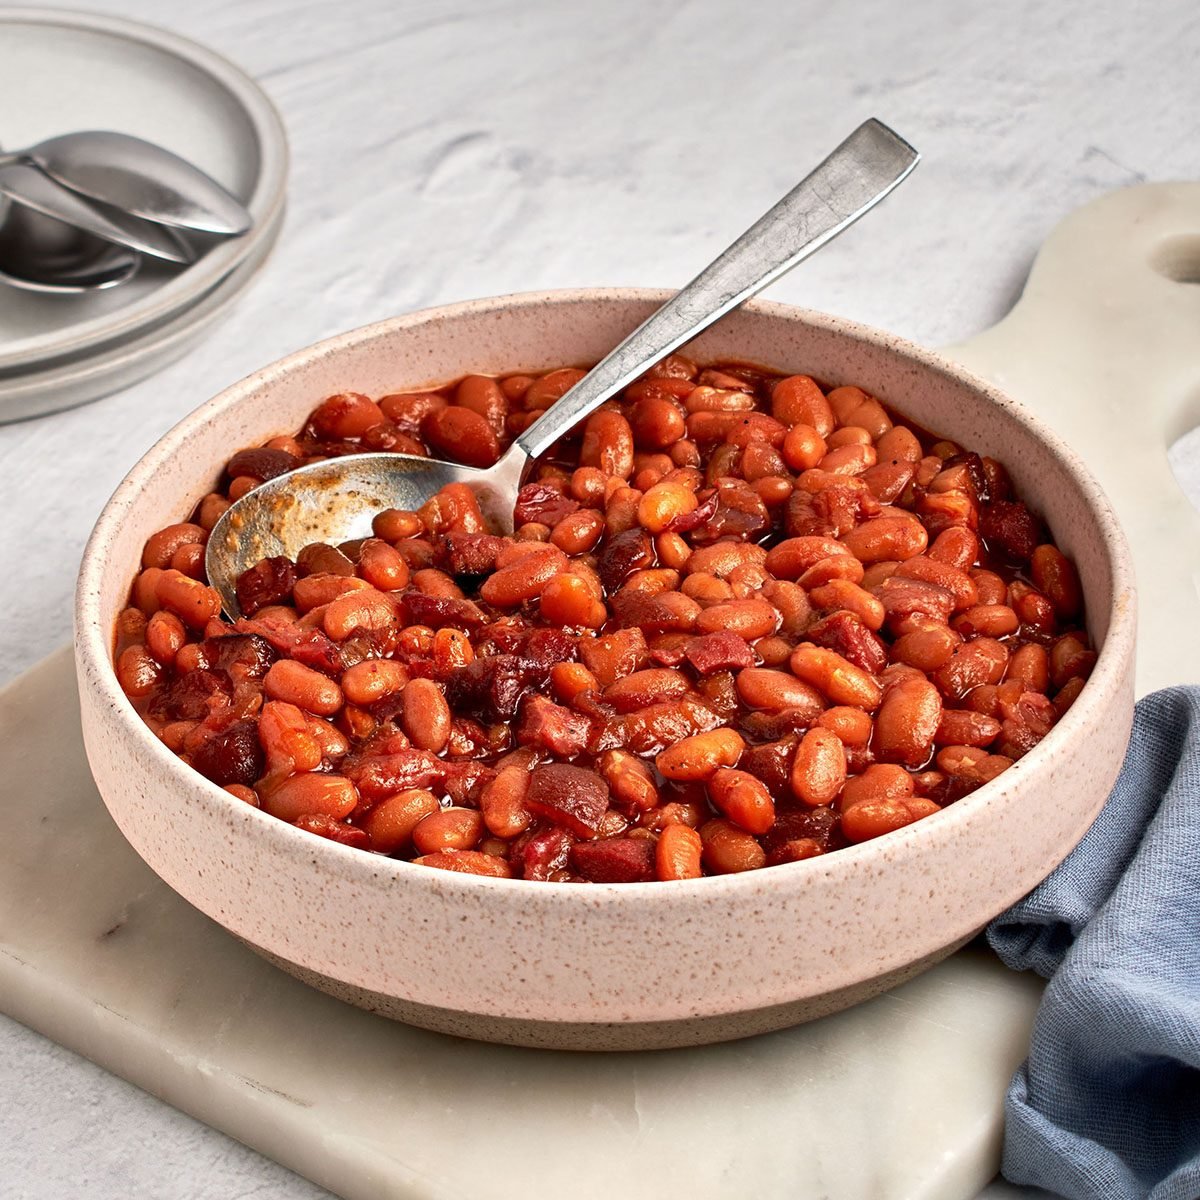 This Instant Pot baked beans recipe by Taste of Home is simple, satisfying and supremely delicious.